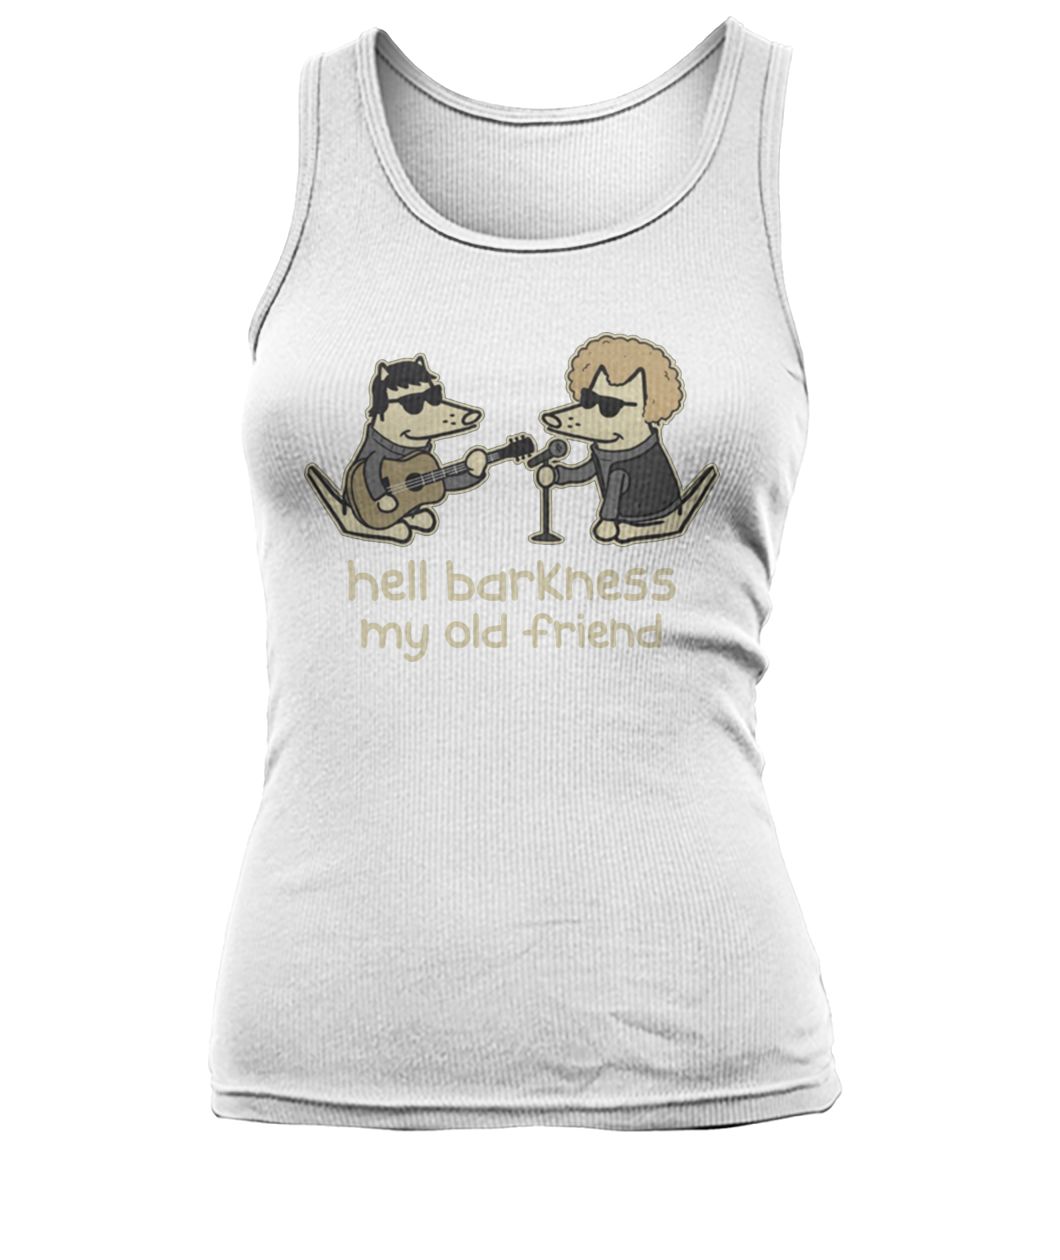 Teddy the dog hell barkness my old friend women's tank top